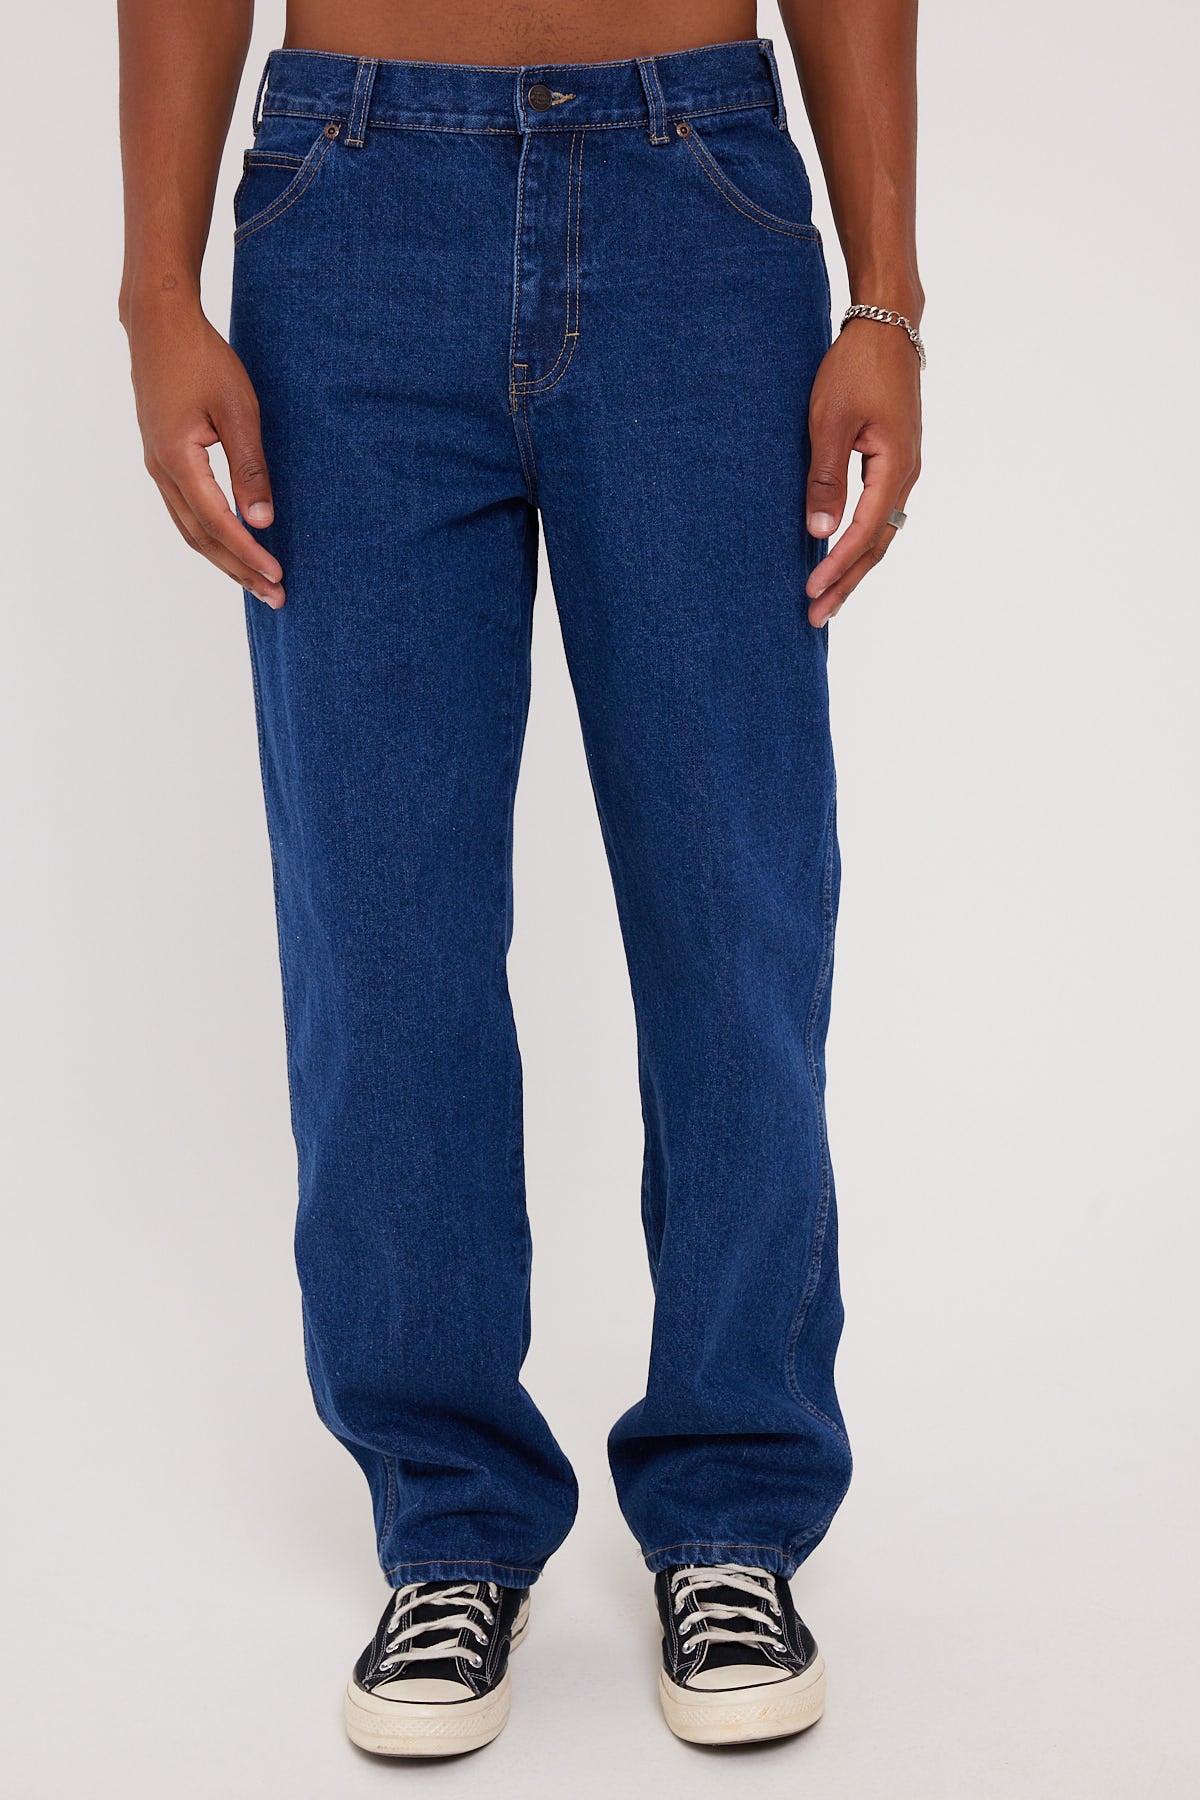 Dickies 13293 Relaxed Fit 5-Pocket Denim Jean Stone Washed Indigo ...